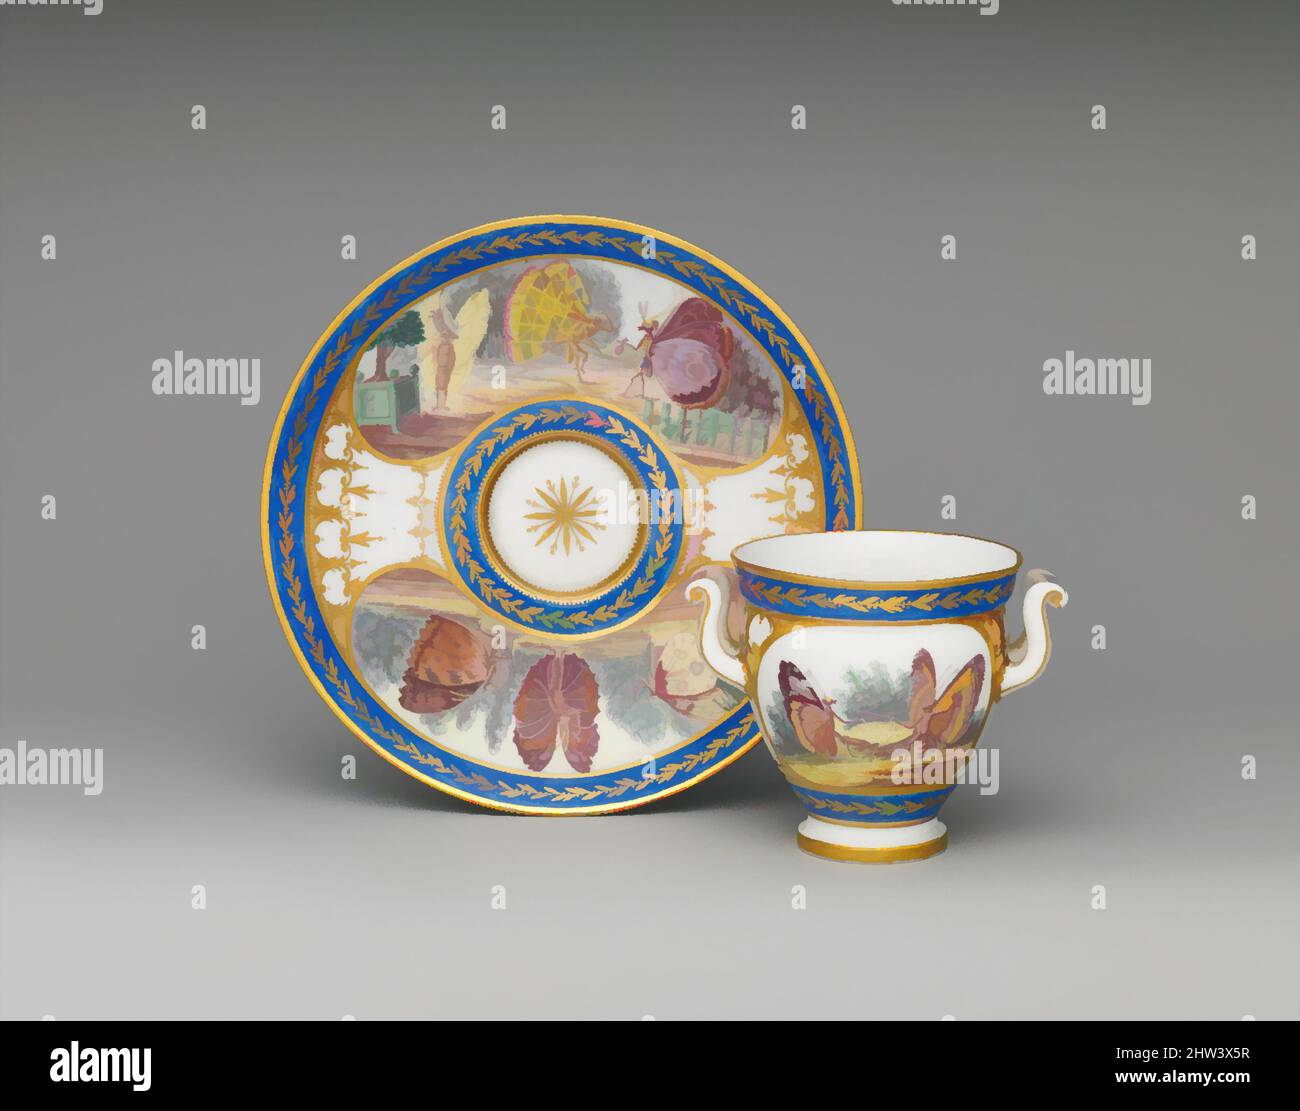 Art inspired by Cup (tasse à l'étrusque) and saucer, 1794, French, Sèvres, Soft-paste porcelain, Height (cup .1): 3 3/16 in. (8.1 cm); Diameter (saucer .2): 6 5/8 in. (16.8 cm), Ceramics-Porcelain, After etchings by Charles Germain de Saint-Aubin (French, Paris 1721–1786 Paris), The, Classic works modernized by Artotop with a splash of modernity. Shapes, color and value, eye-catching visual impact on art. Emotions through freedom of artworks in a contemporary way. A timeless message pursuing a wildly creative new direction. Artists turning to the digital medium and creating the Artotop NFT Stock Photo